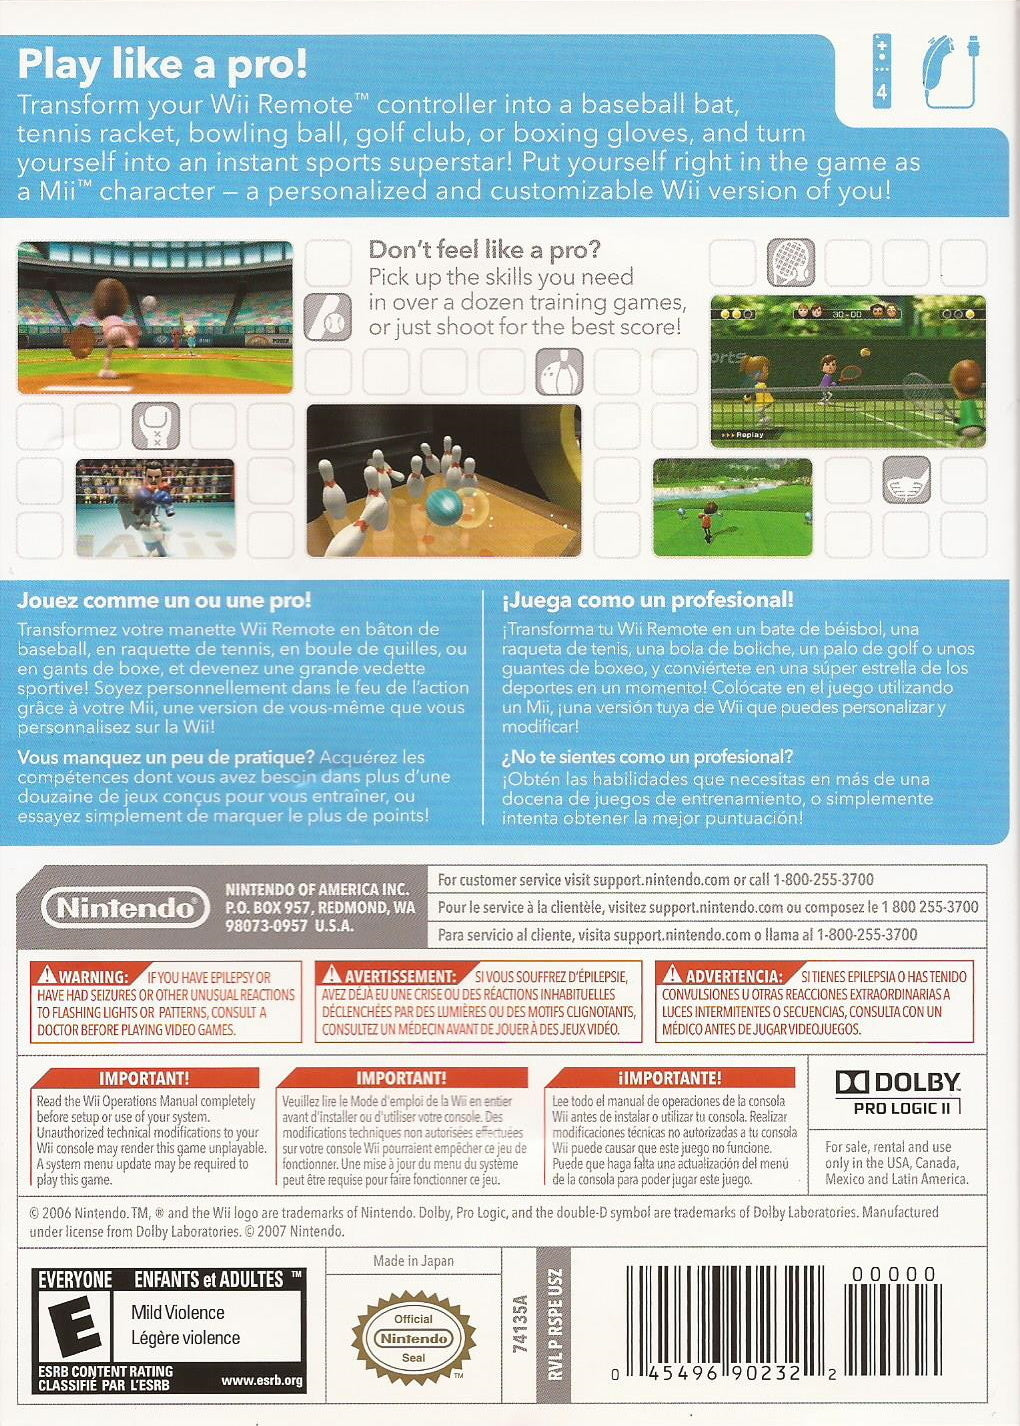 Wii Sports (Nintendo Selects)  - Nintendo Wii [Pre-Owned] Video Games Nintendo   